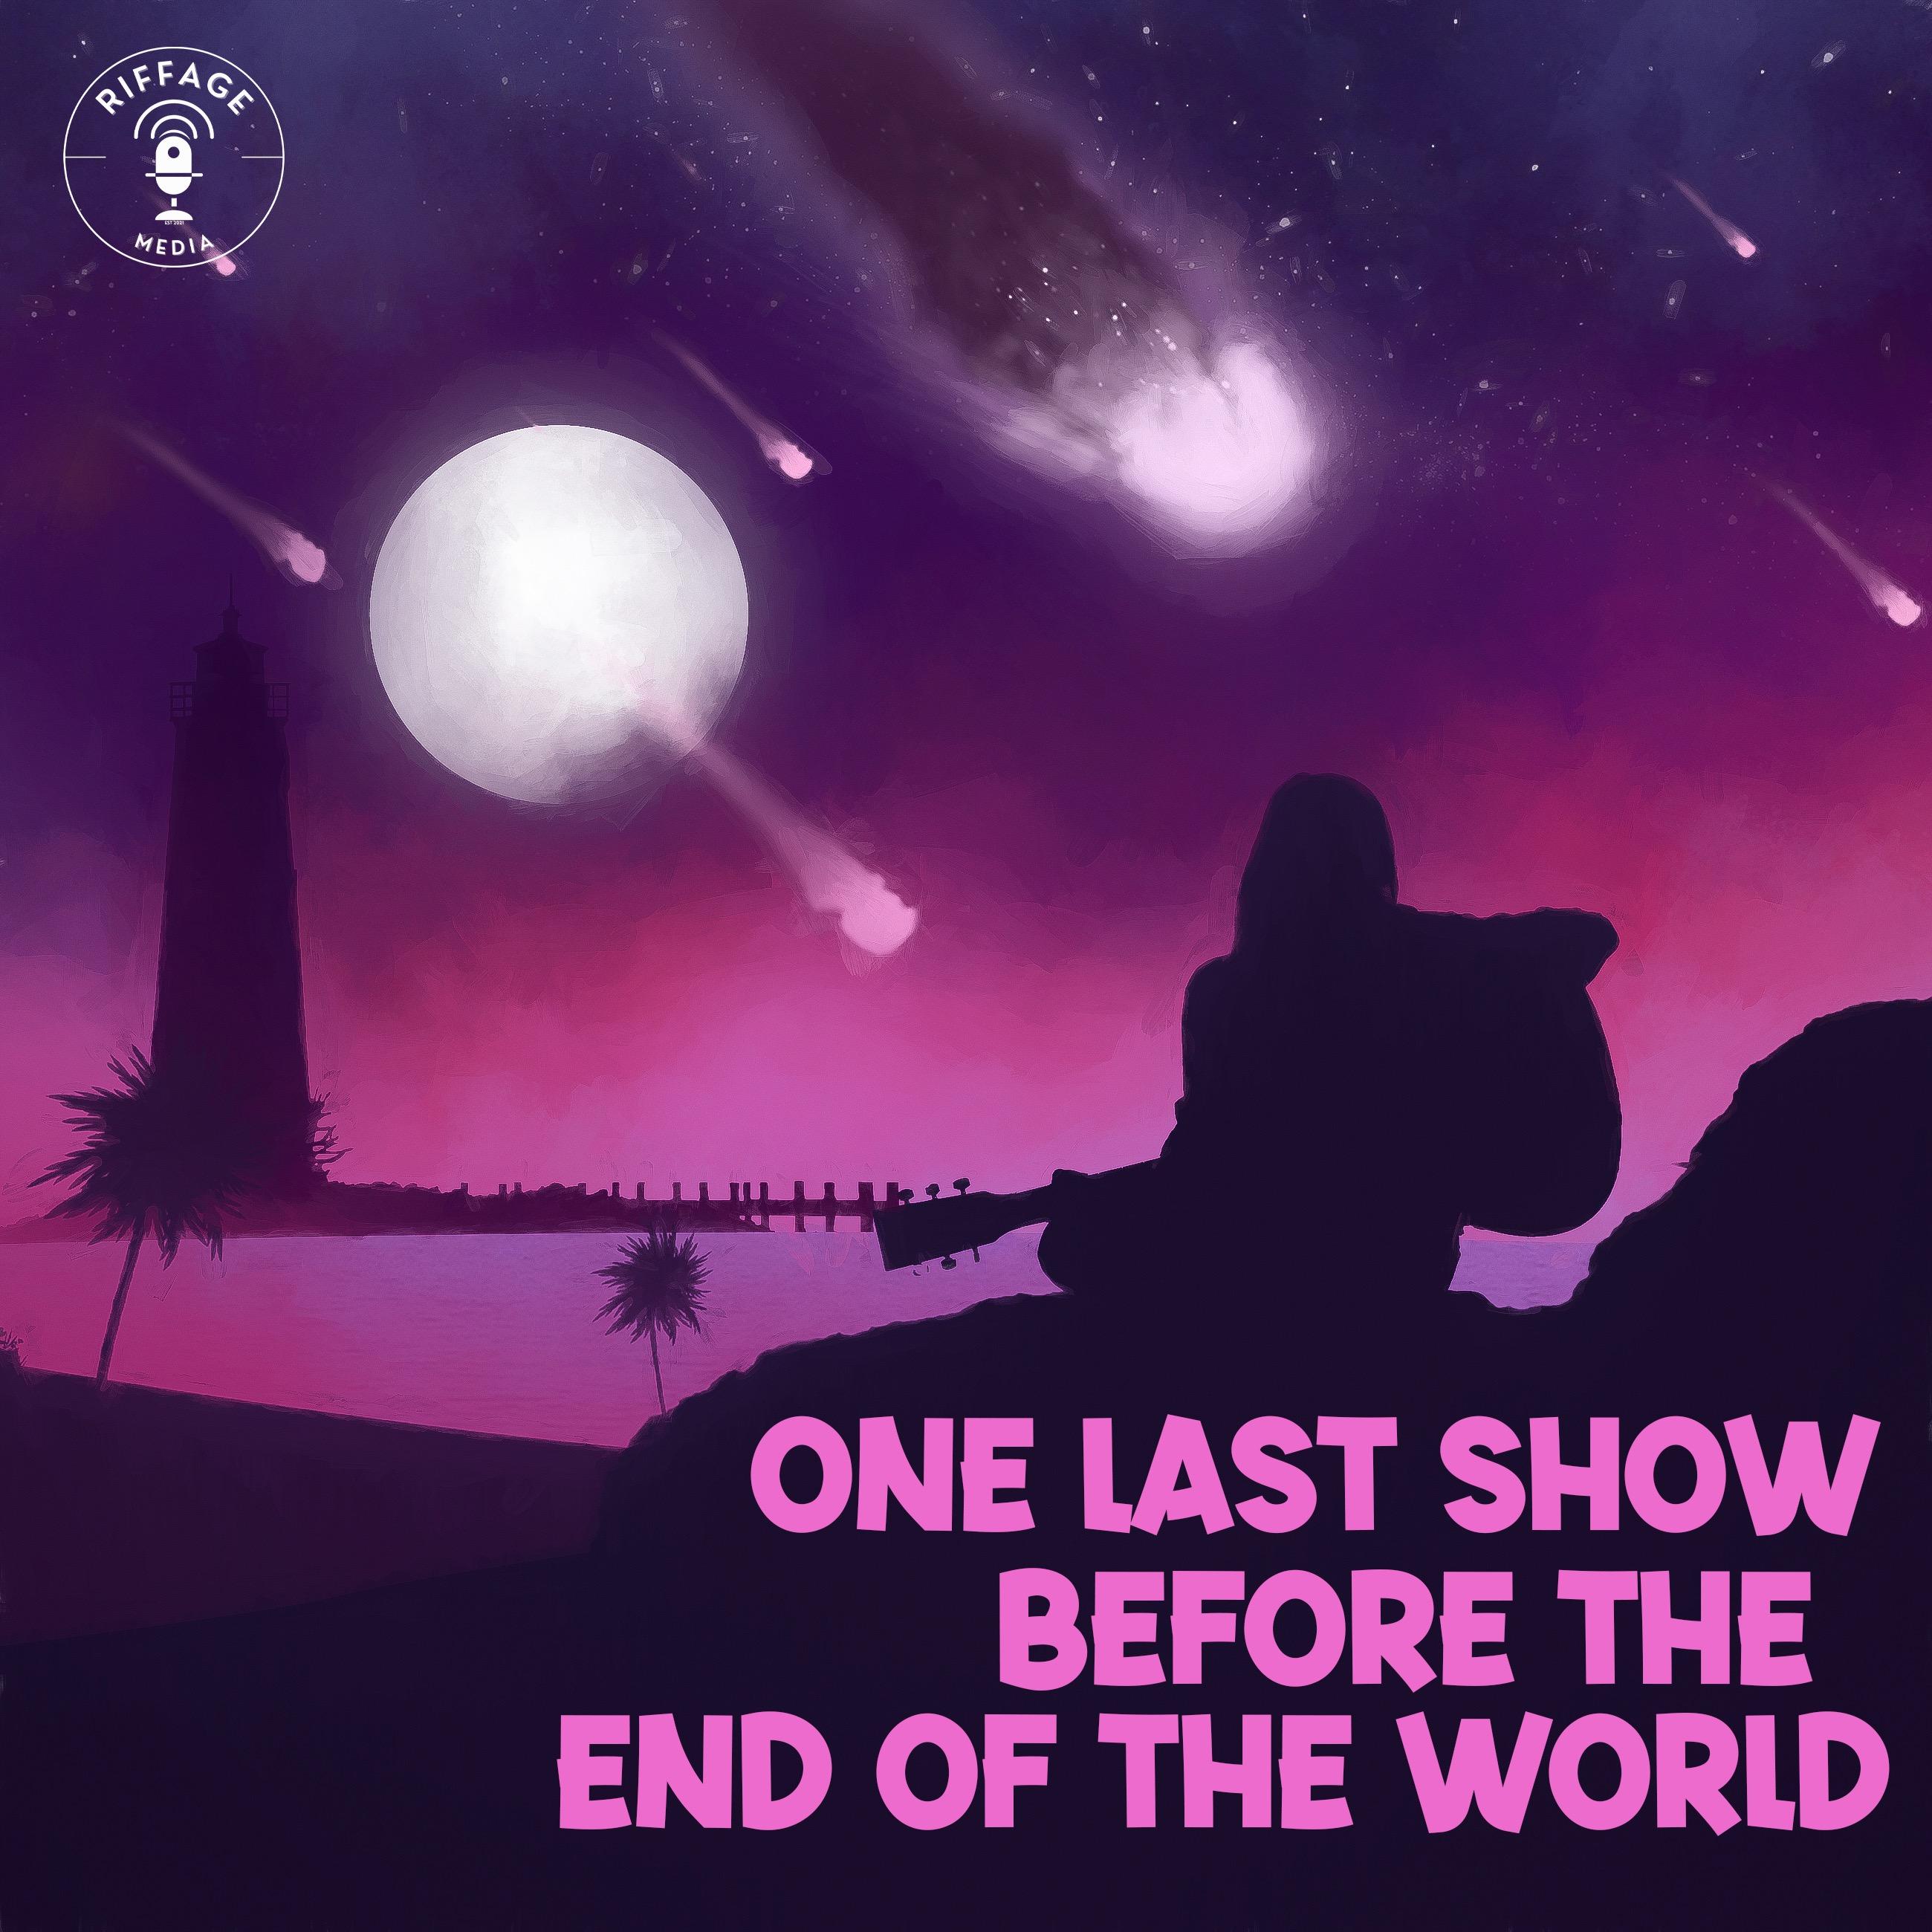 One Last Show Before the End of the World